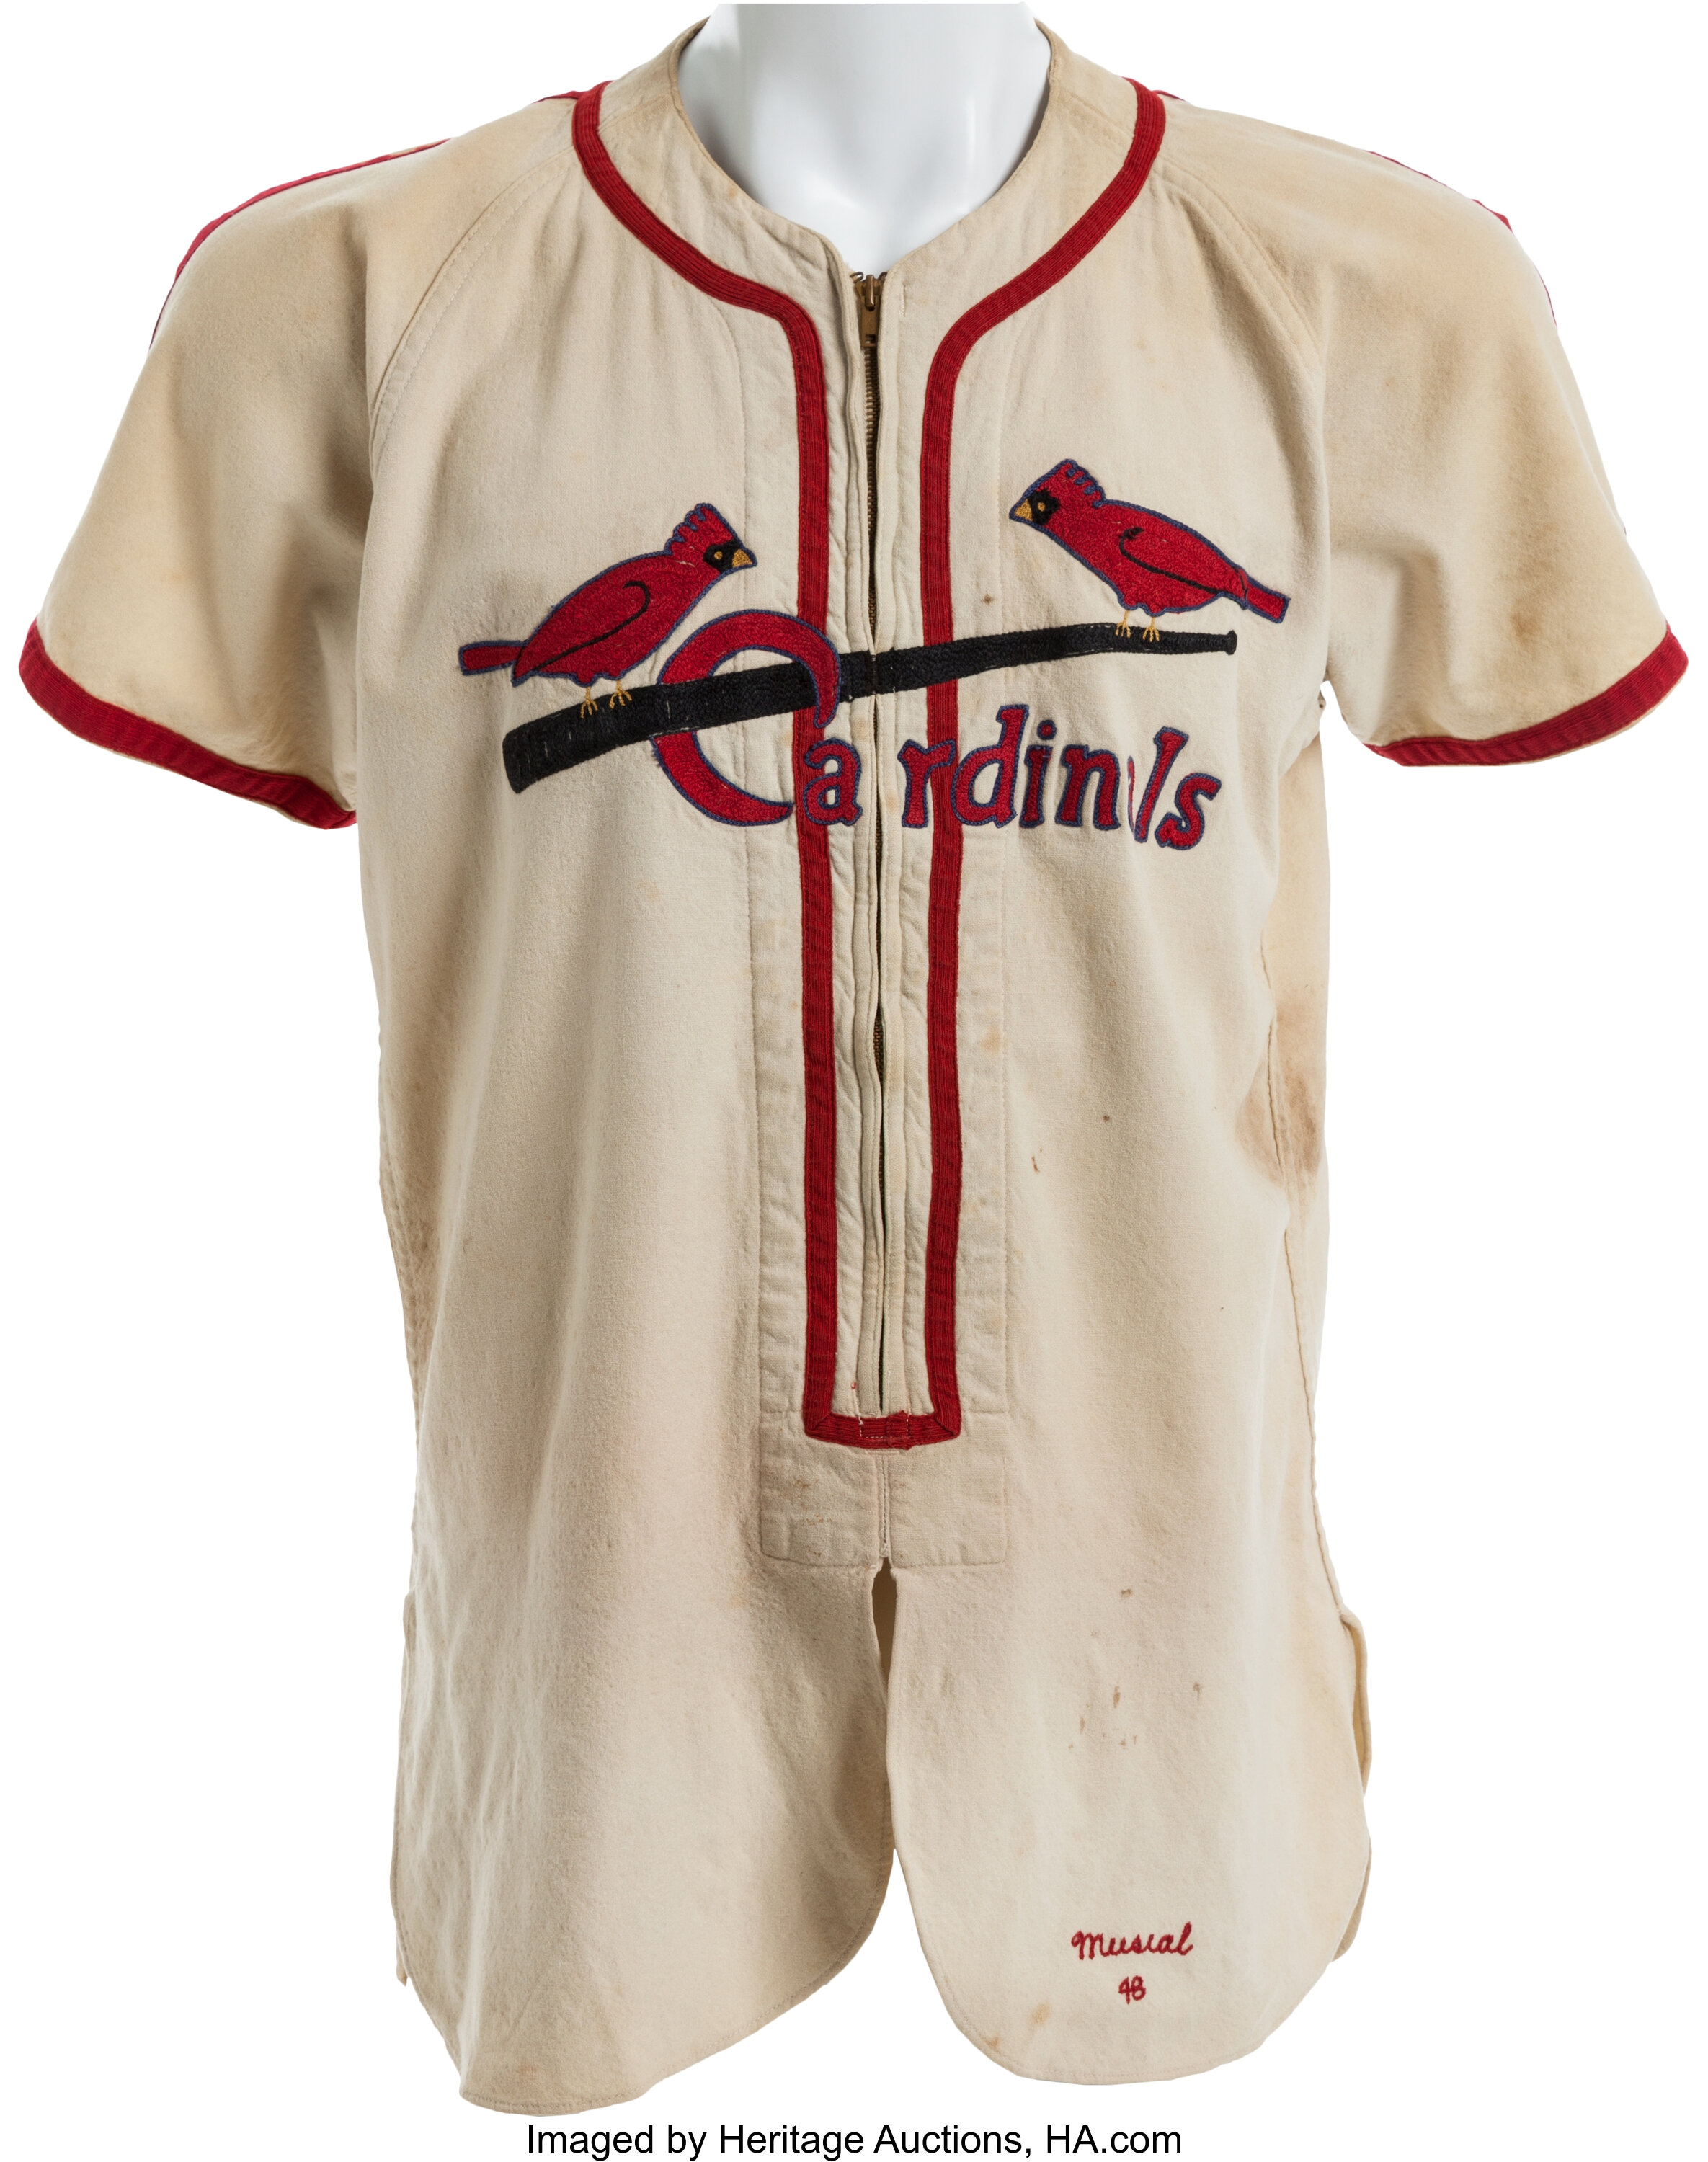 St. Louis Cardinals Jersey, worn by Stan Musial